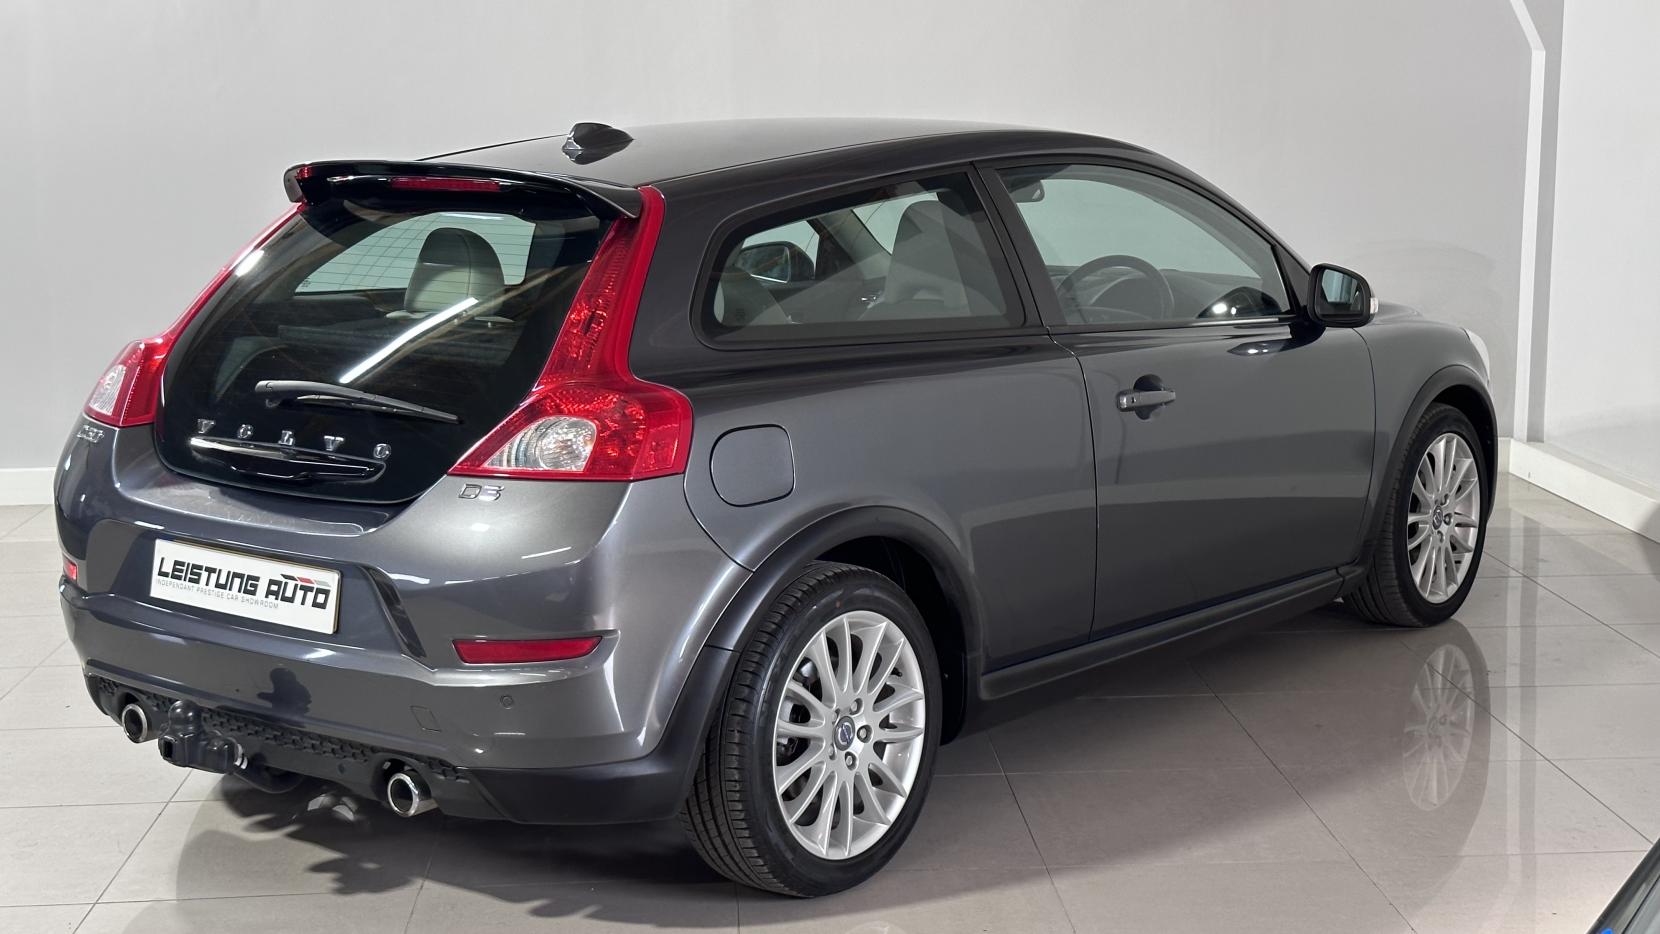 Volvo C30 2.0 D3 SE Lux Sports Coupe 3dr Diesel Geartronic Euro 5 (150 ps)